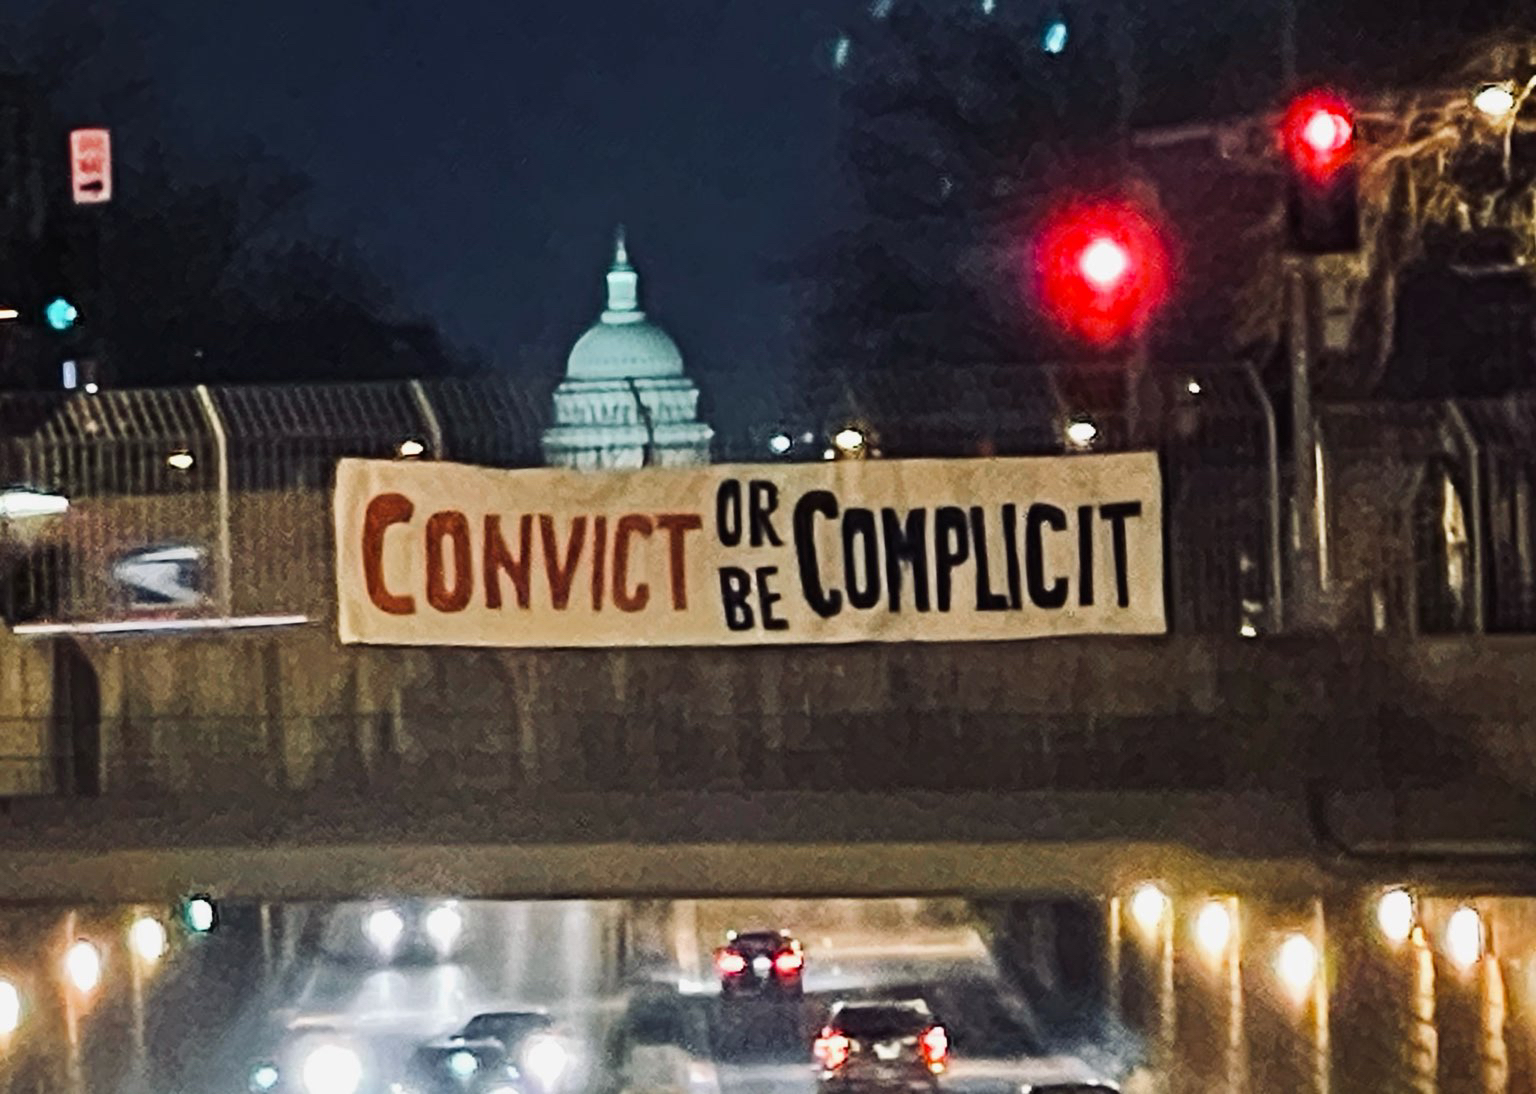 convict or be complicit banner near the capitol